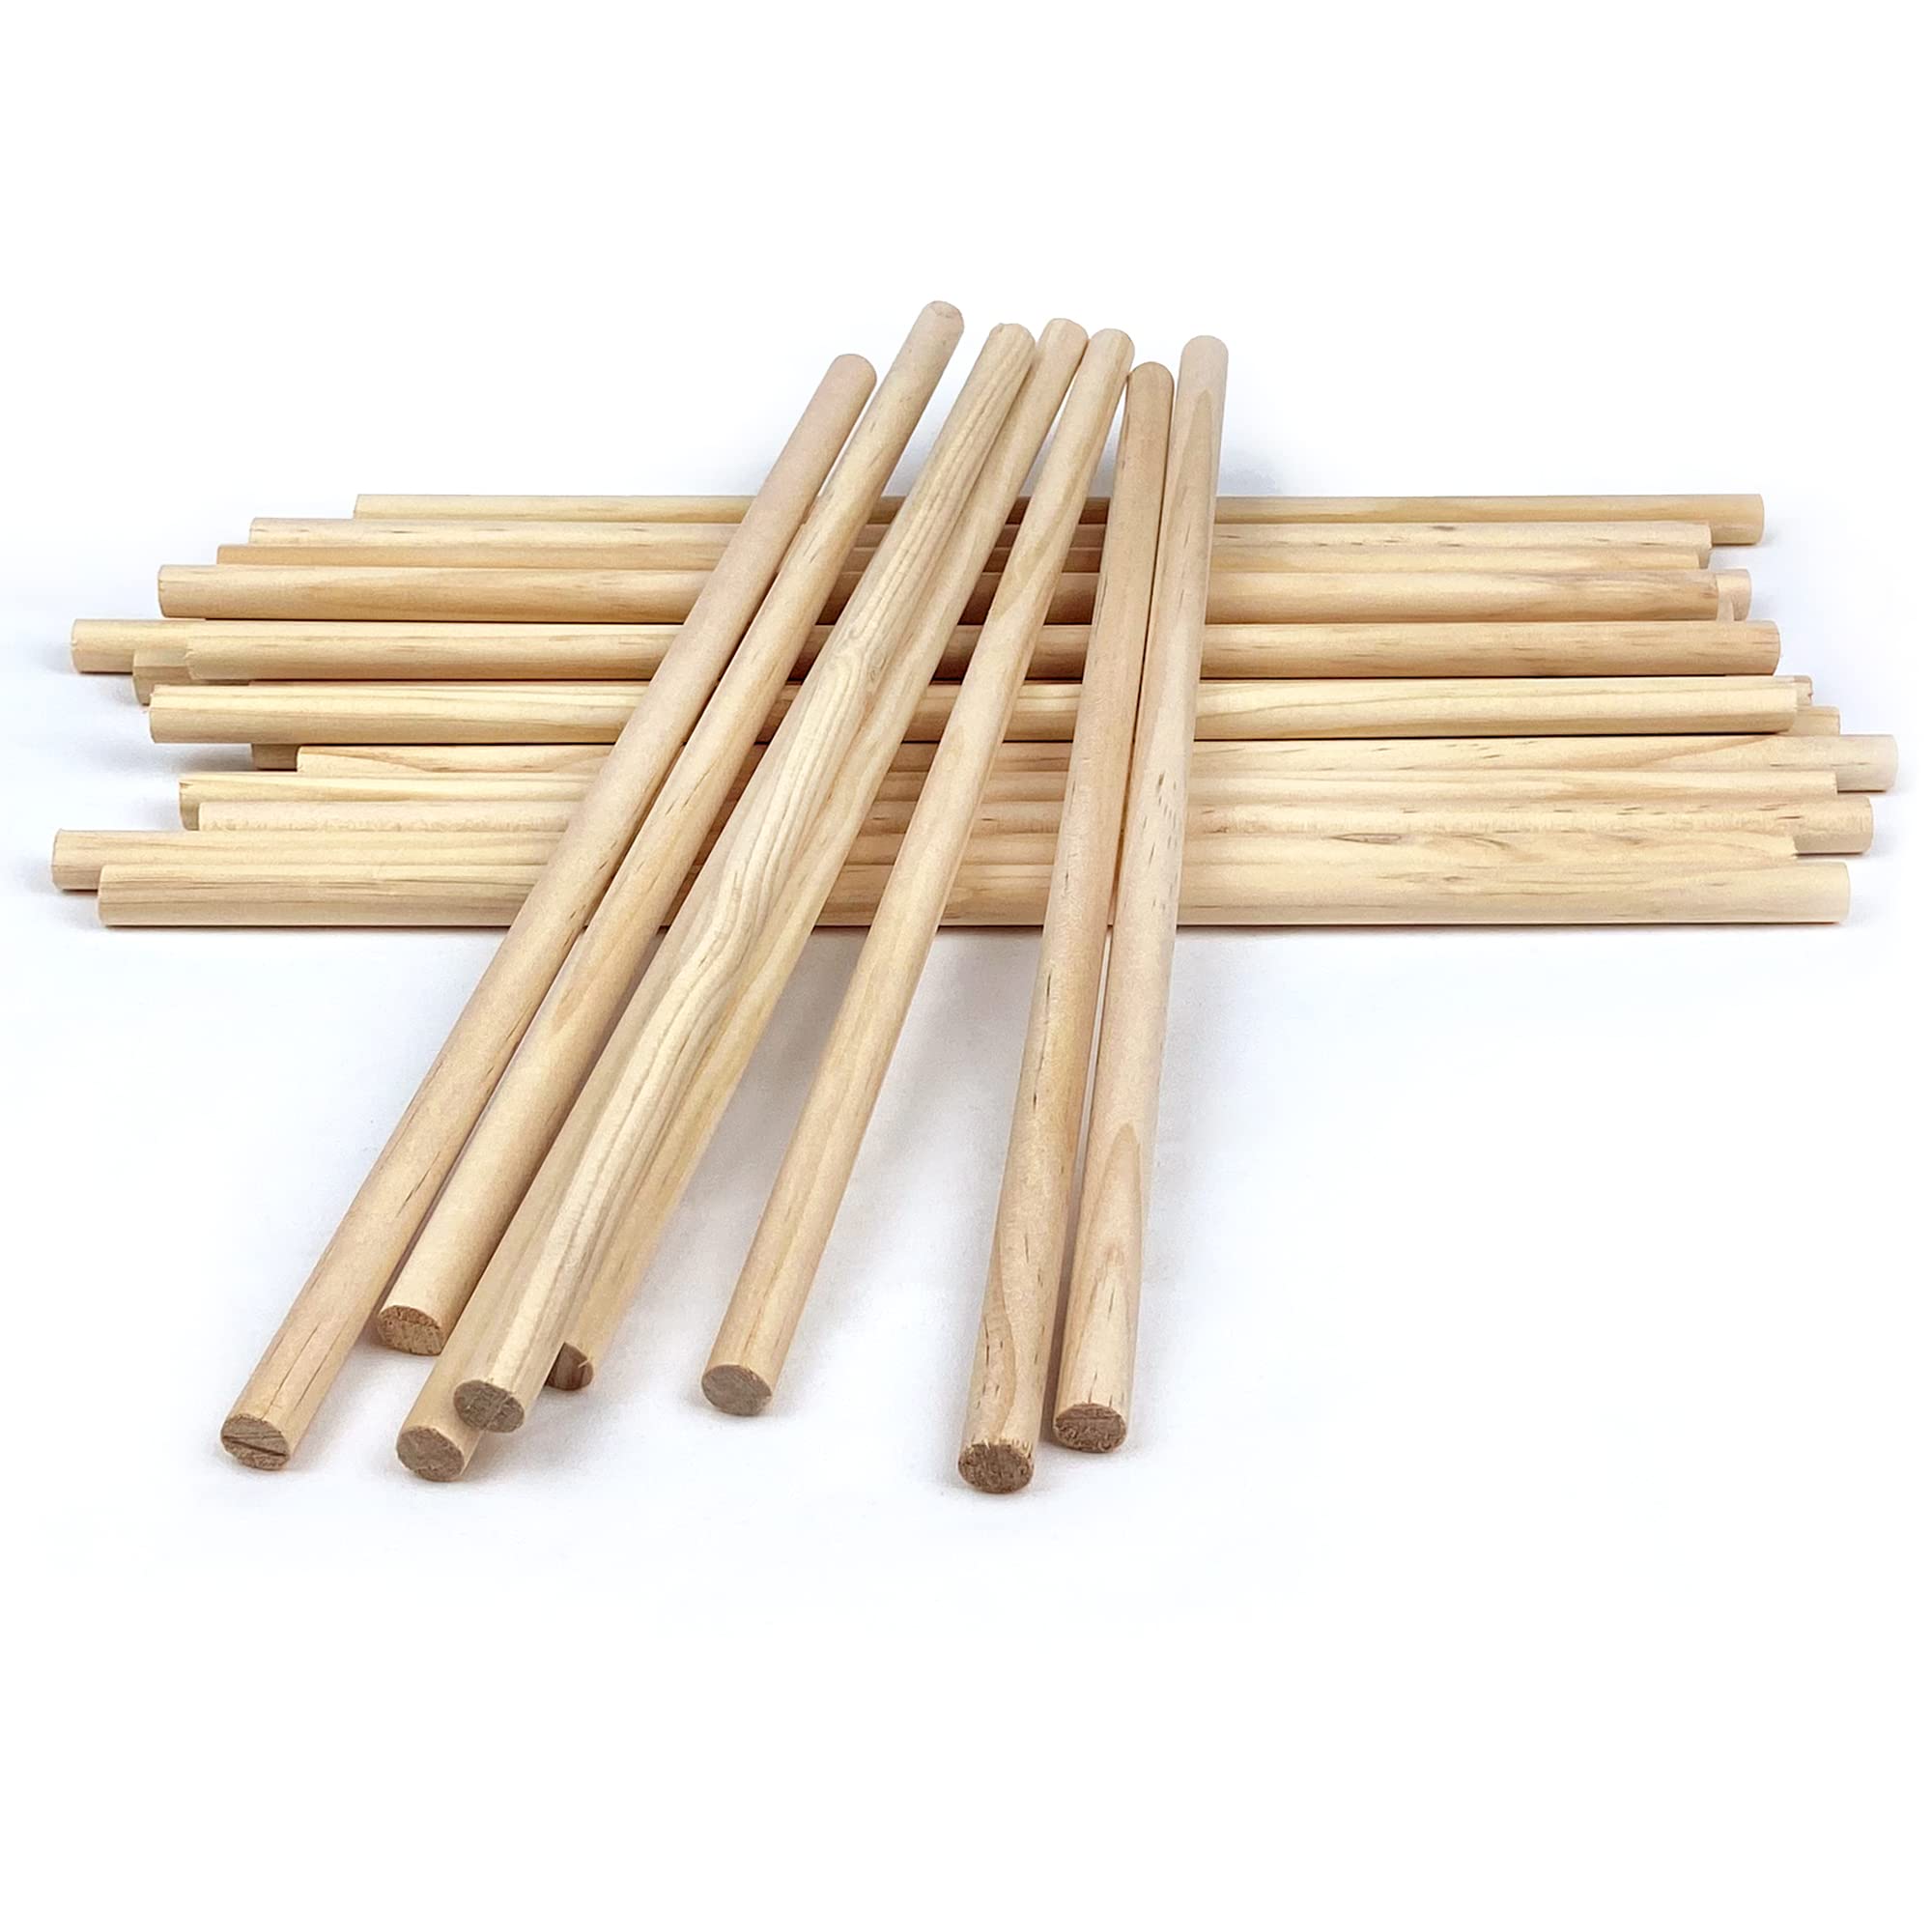 3/8 x 12 Inch Wooden Dowel Rods 25 PCS Unfinished Round Sticks for Pennant  Wedding Christmas Music Class Party DIY Crafts Wooden B